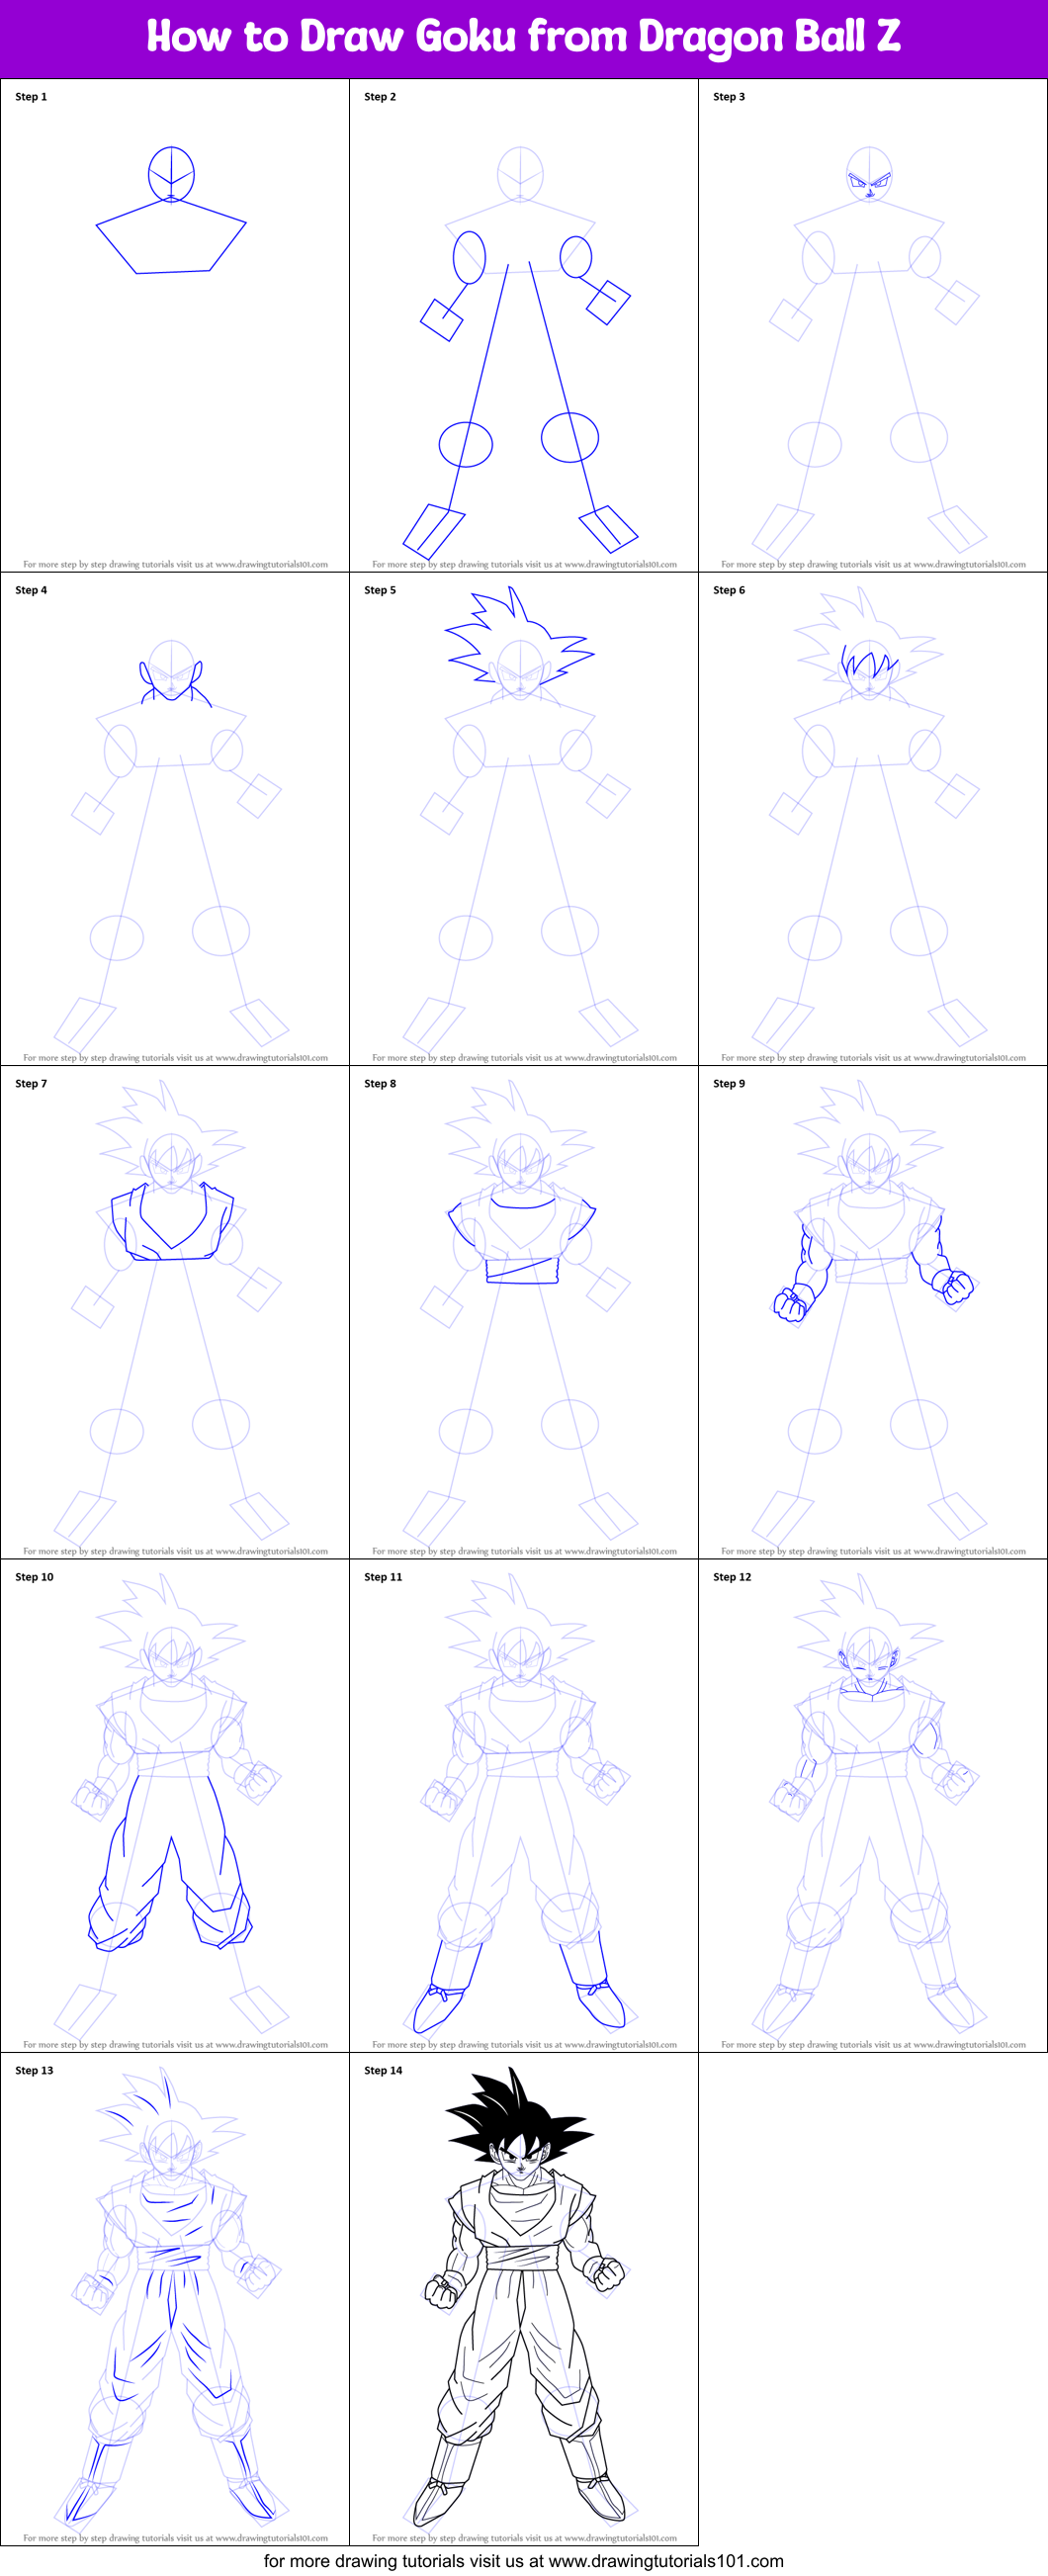 How to Draw Goku from Dragon Ball Z printable step by step drawing sheet :  